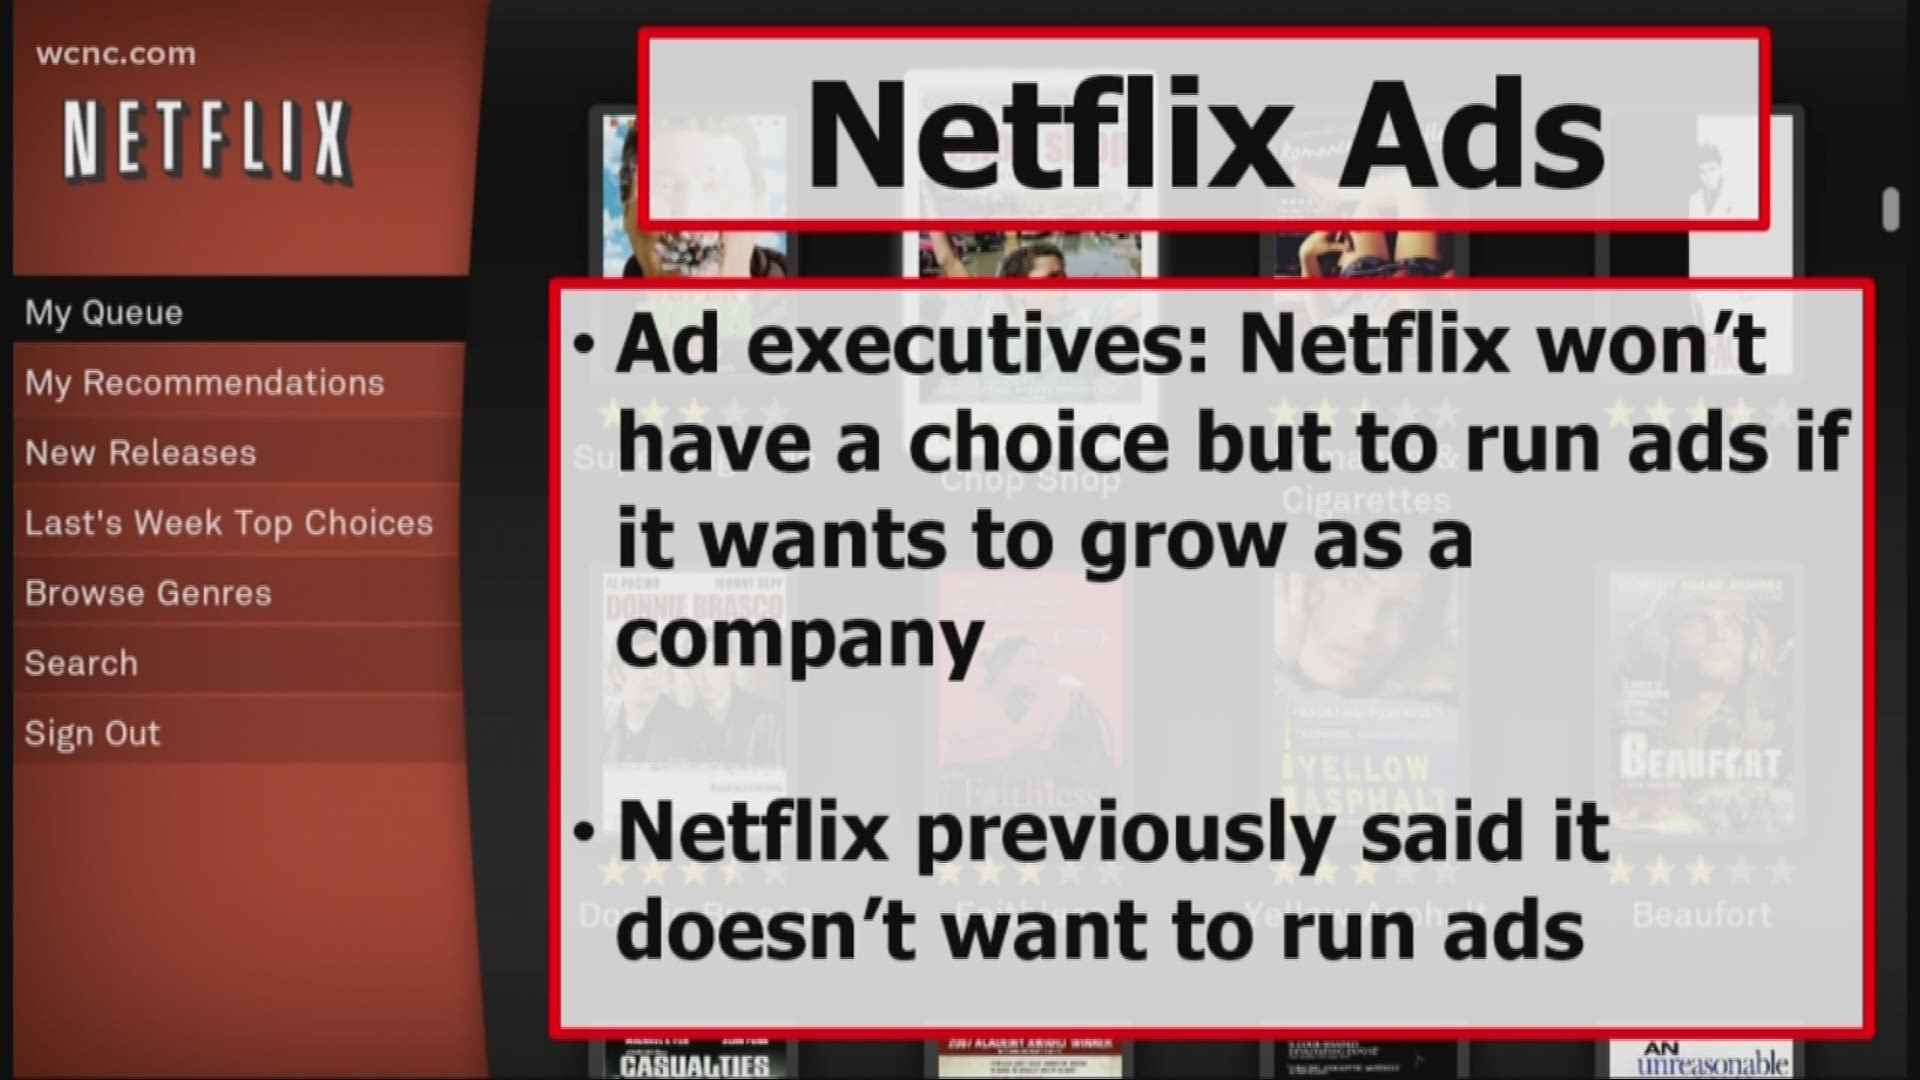 Many people subscribe to Netflix because there are no ads. But according to a CNBC report, industry experts believe the streaming service will have no choice but to run ads if it wants to continue to grow.